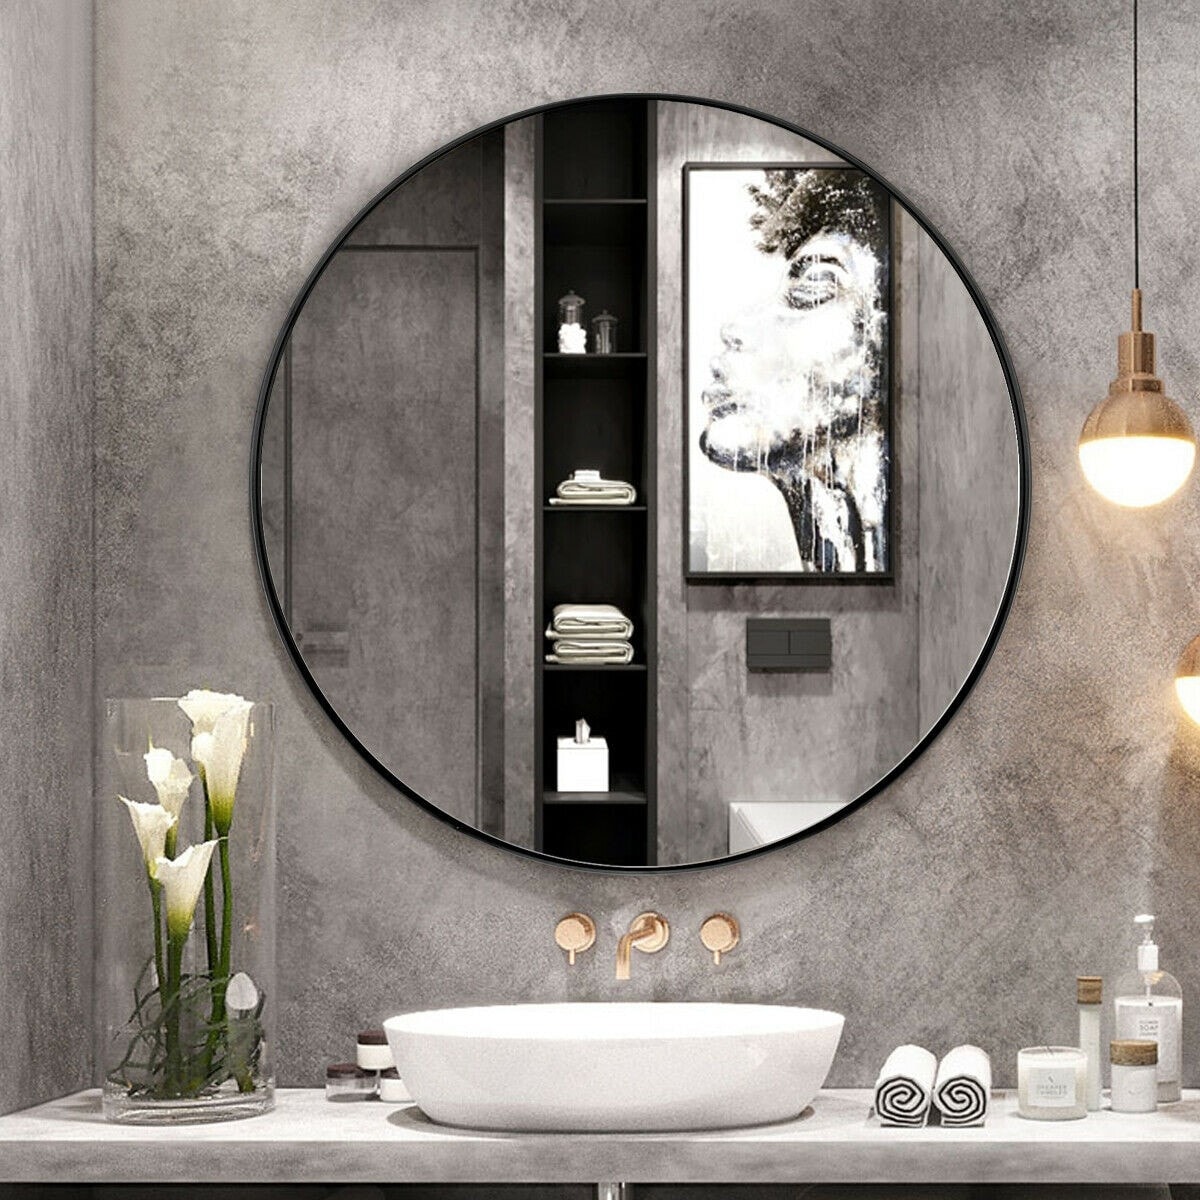 USHOWER 30 inch Black Round Mirror for Wall, Metal Frame Large Circle Mirror for Bathroom, Bedroom, Living Room and Entryway